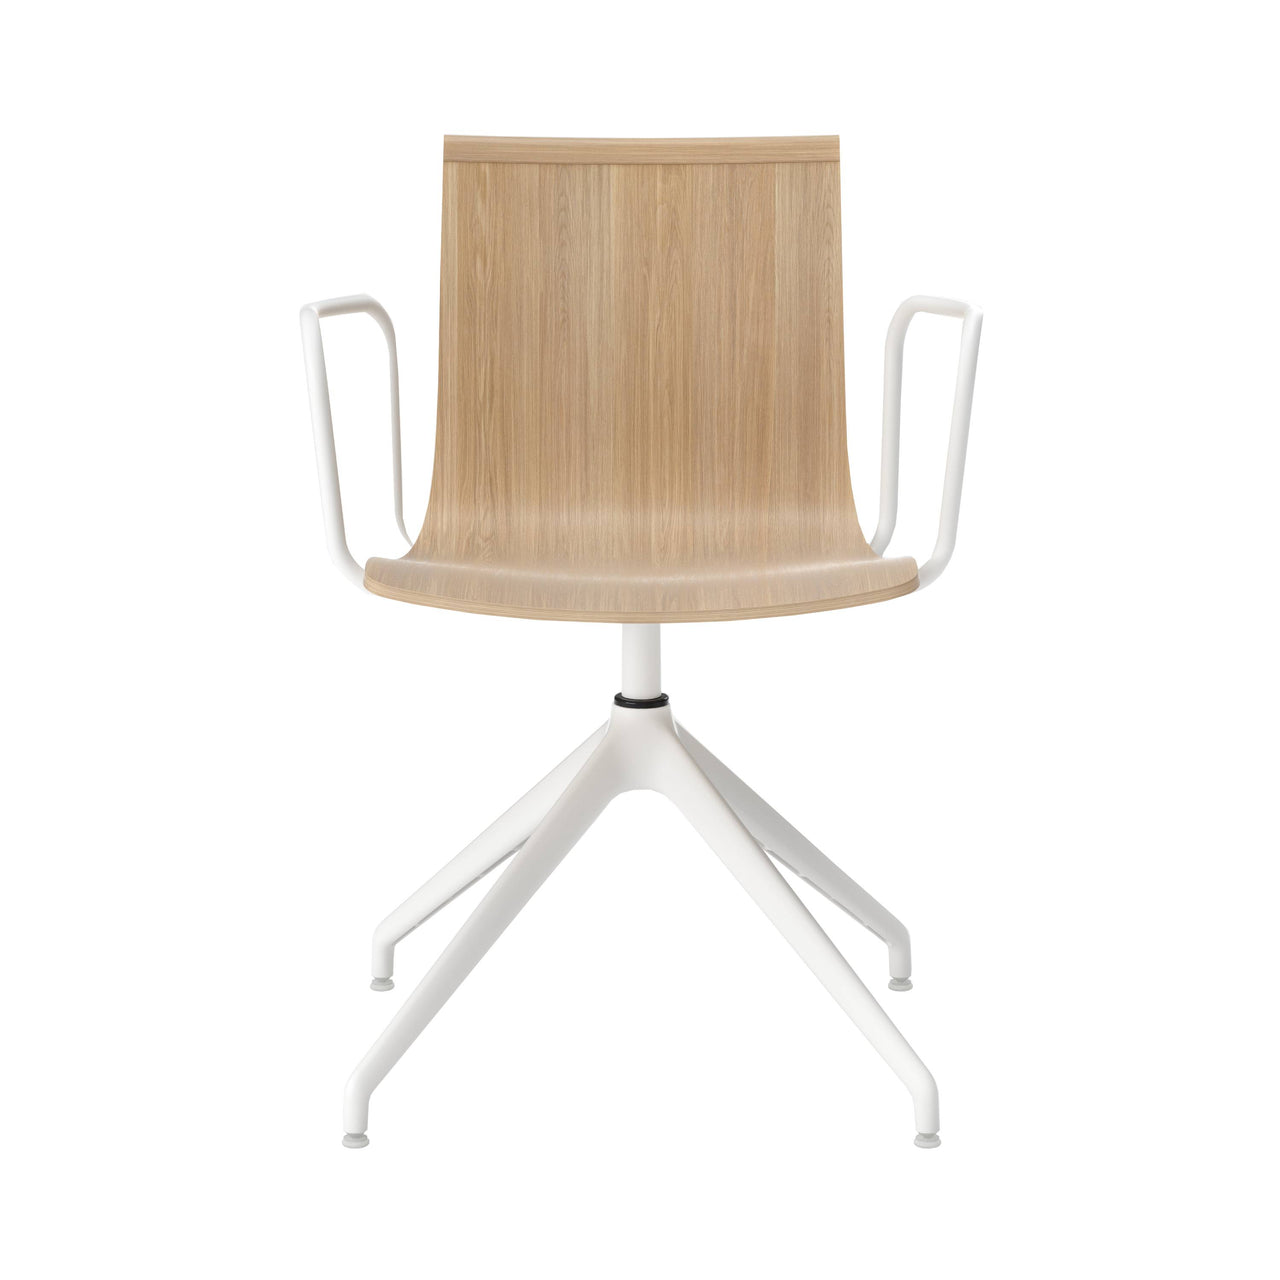 Serif Chair: 4 Star Base + White + Natural Oak + With Armrest